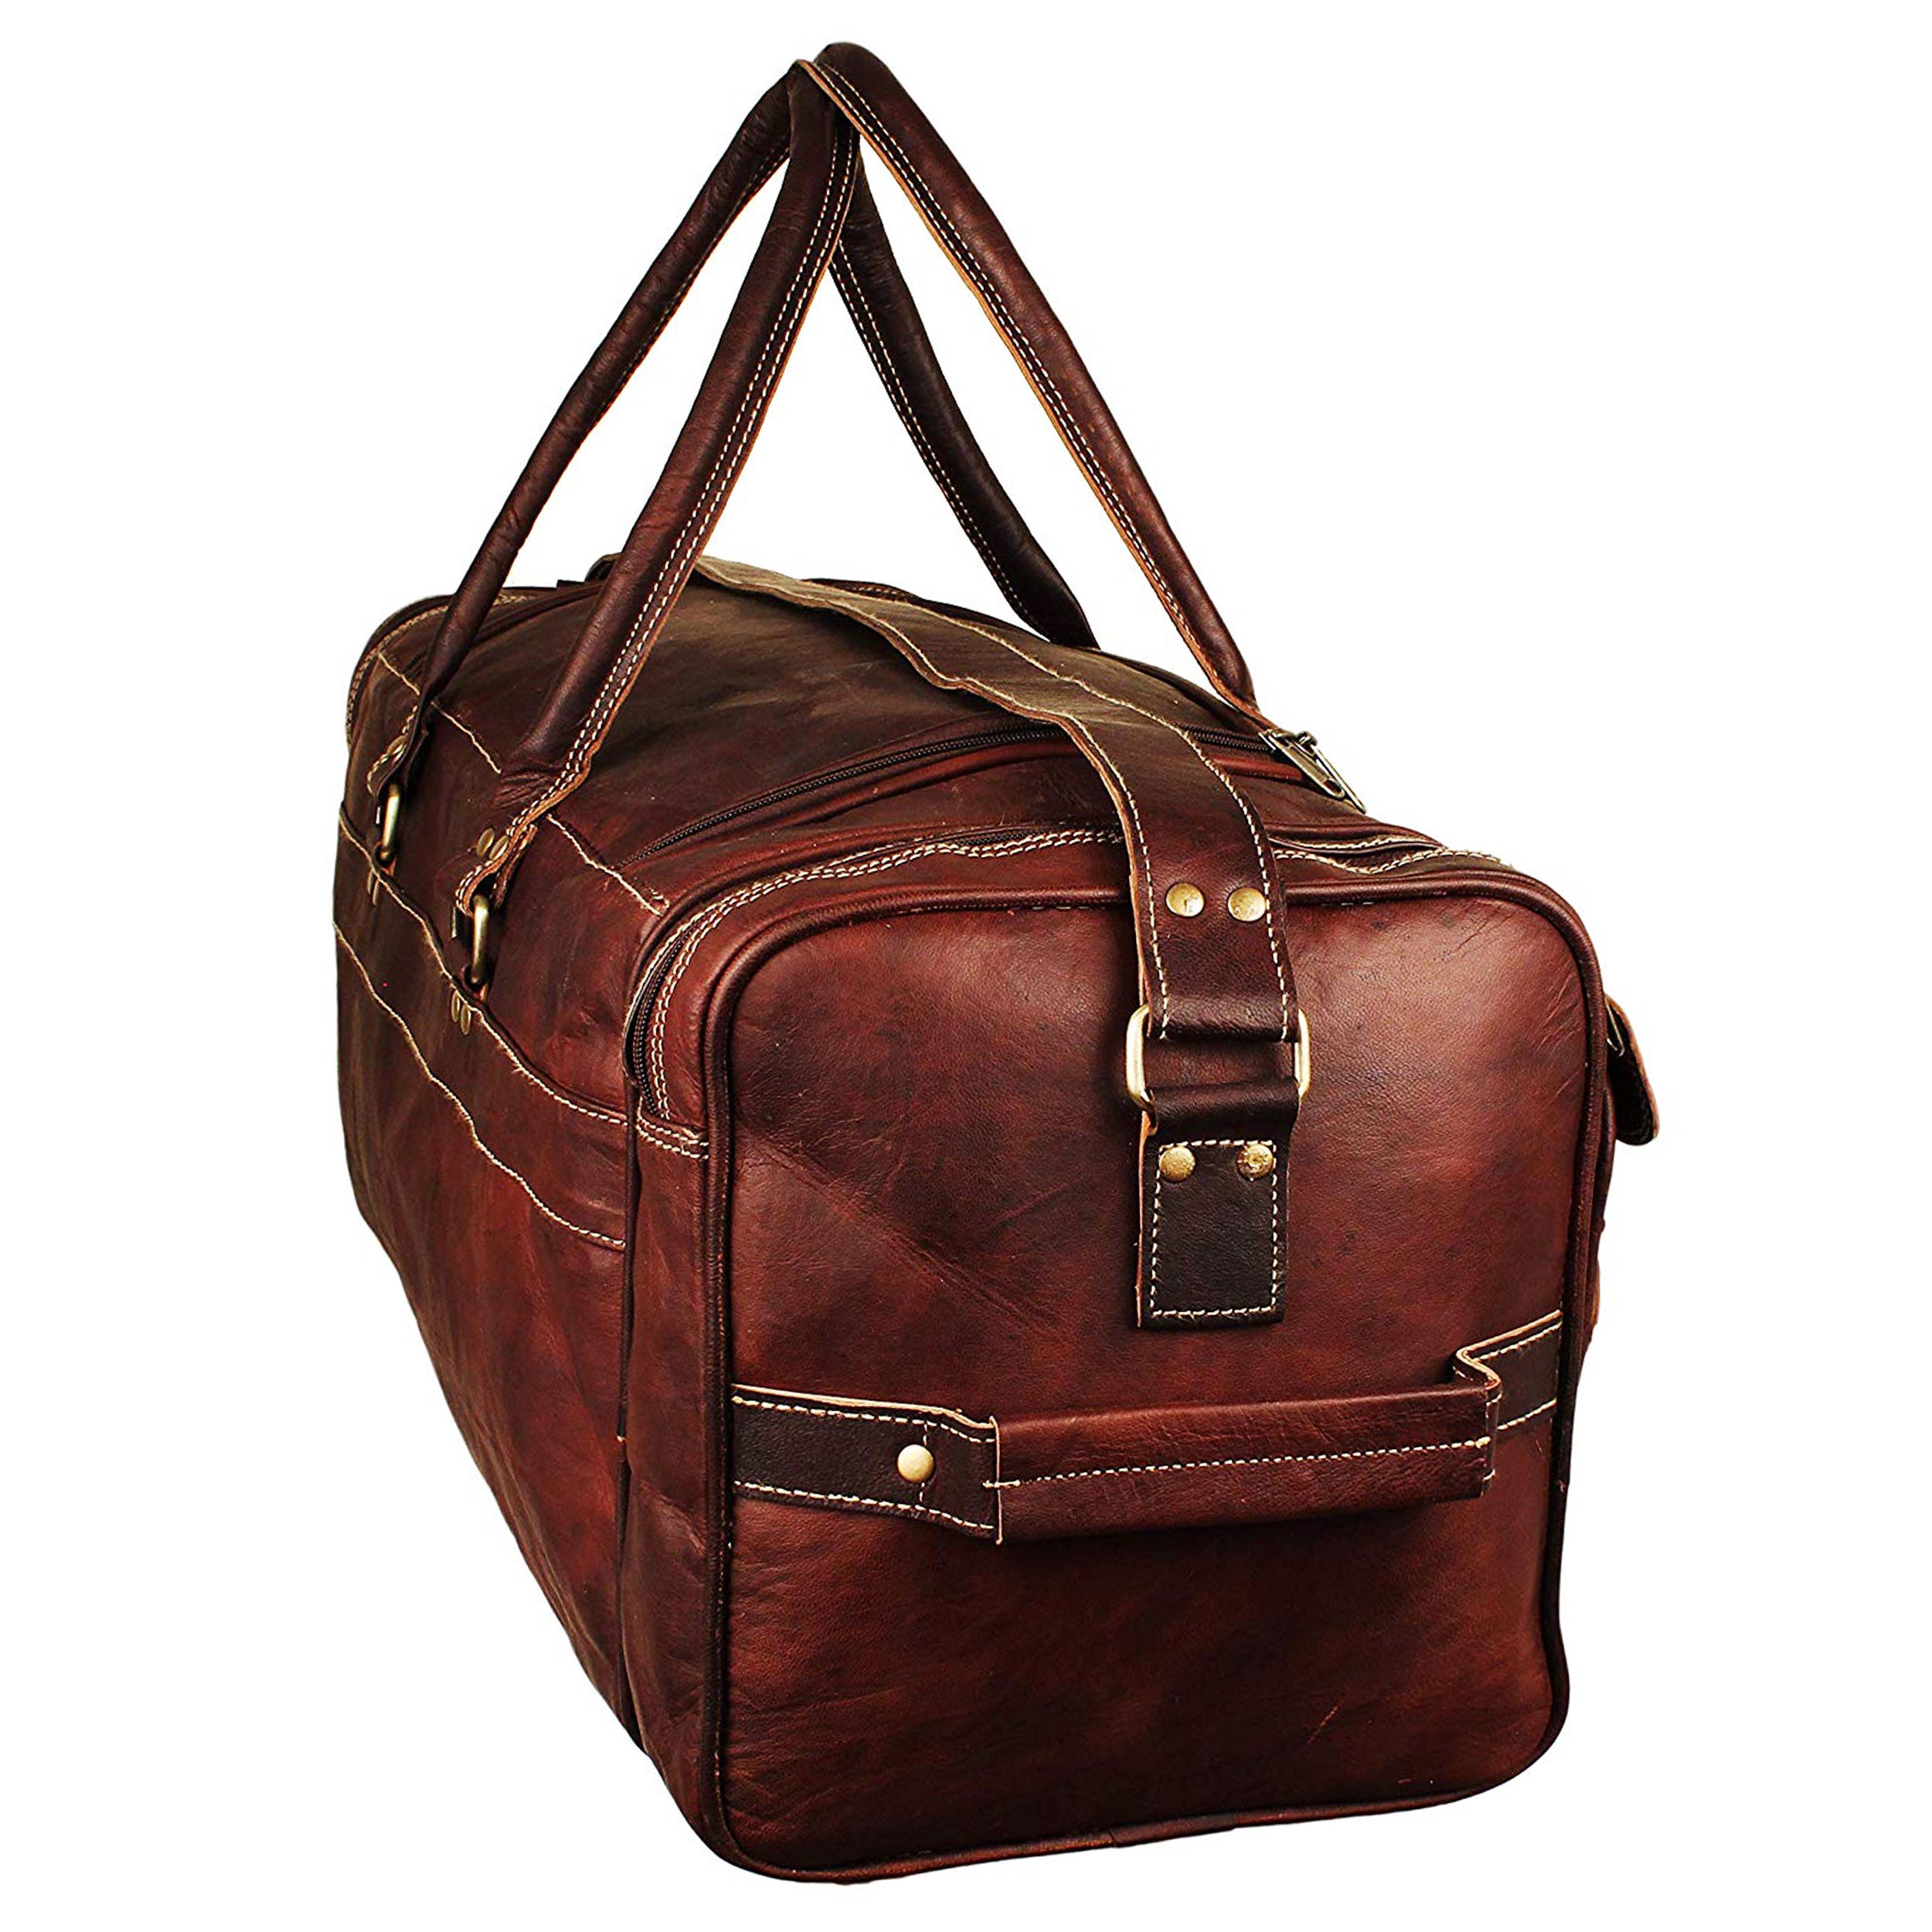 Genuine Full Grain leather duffle bag with top handle